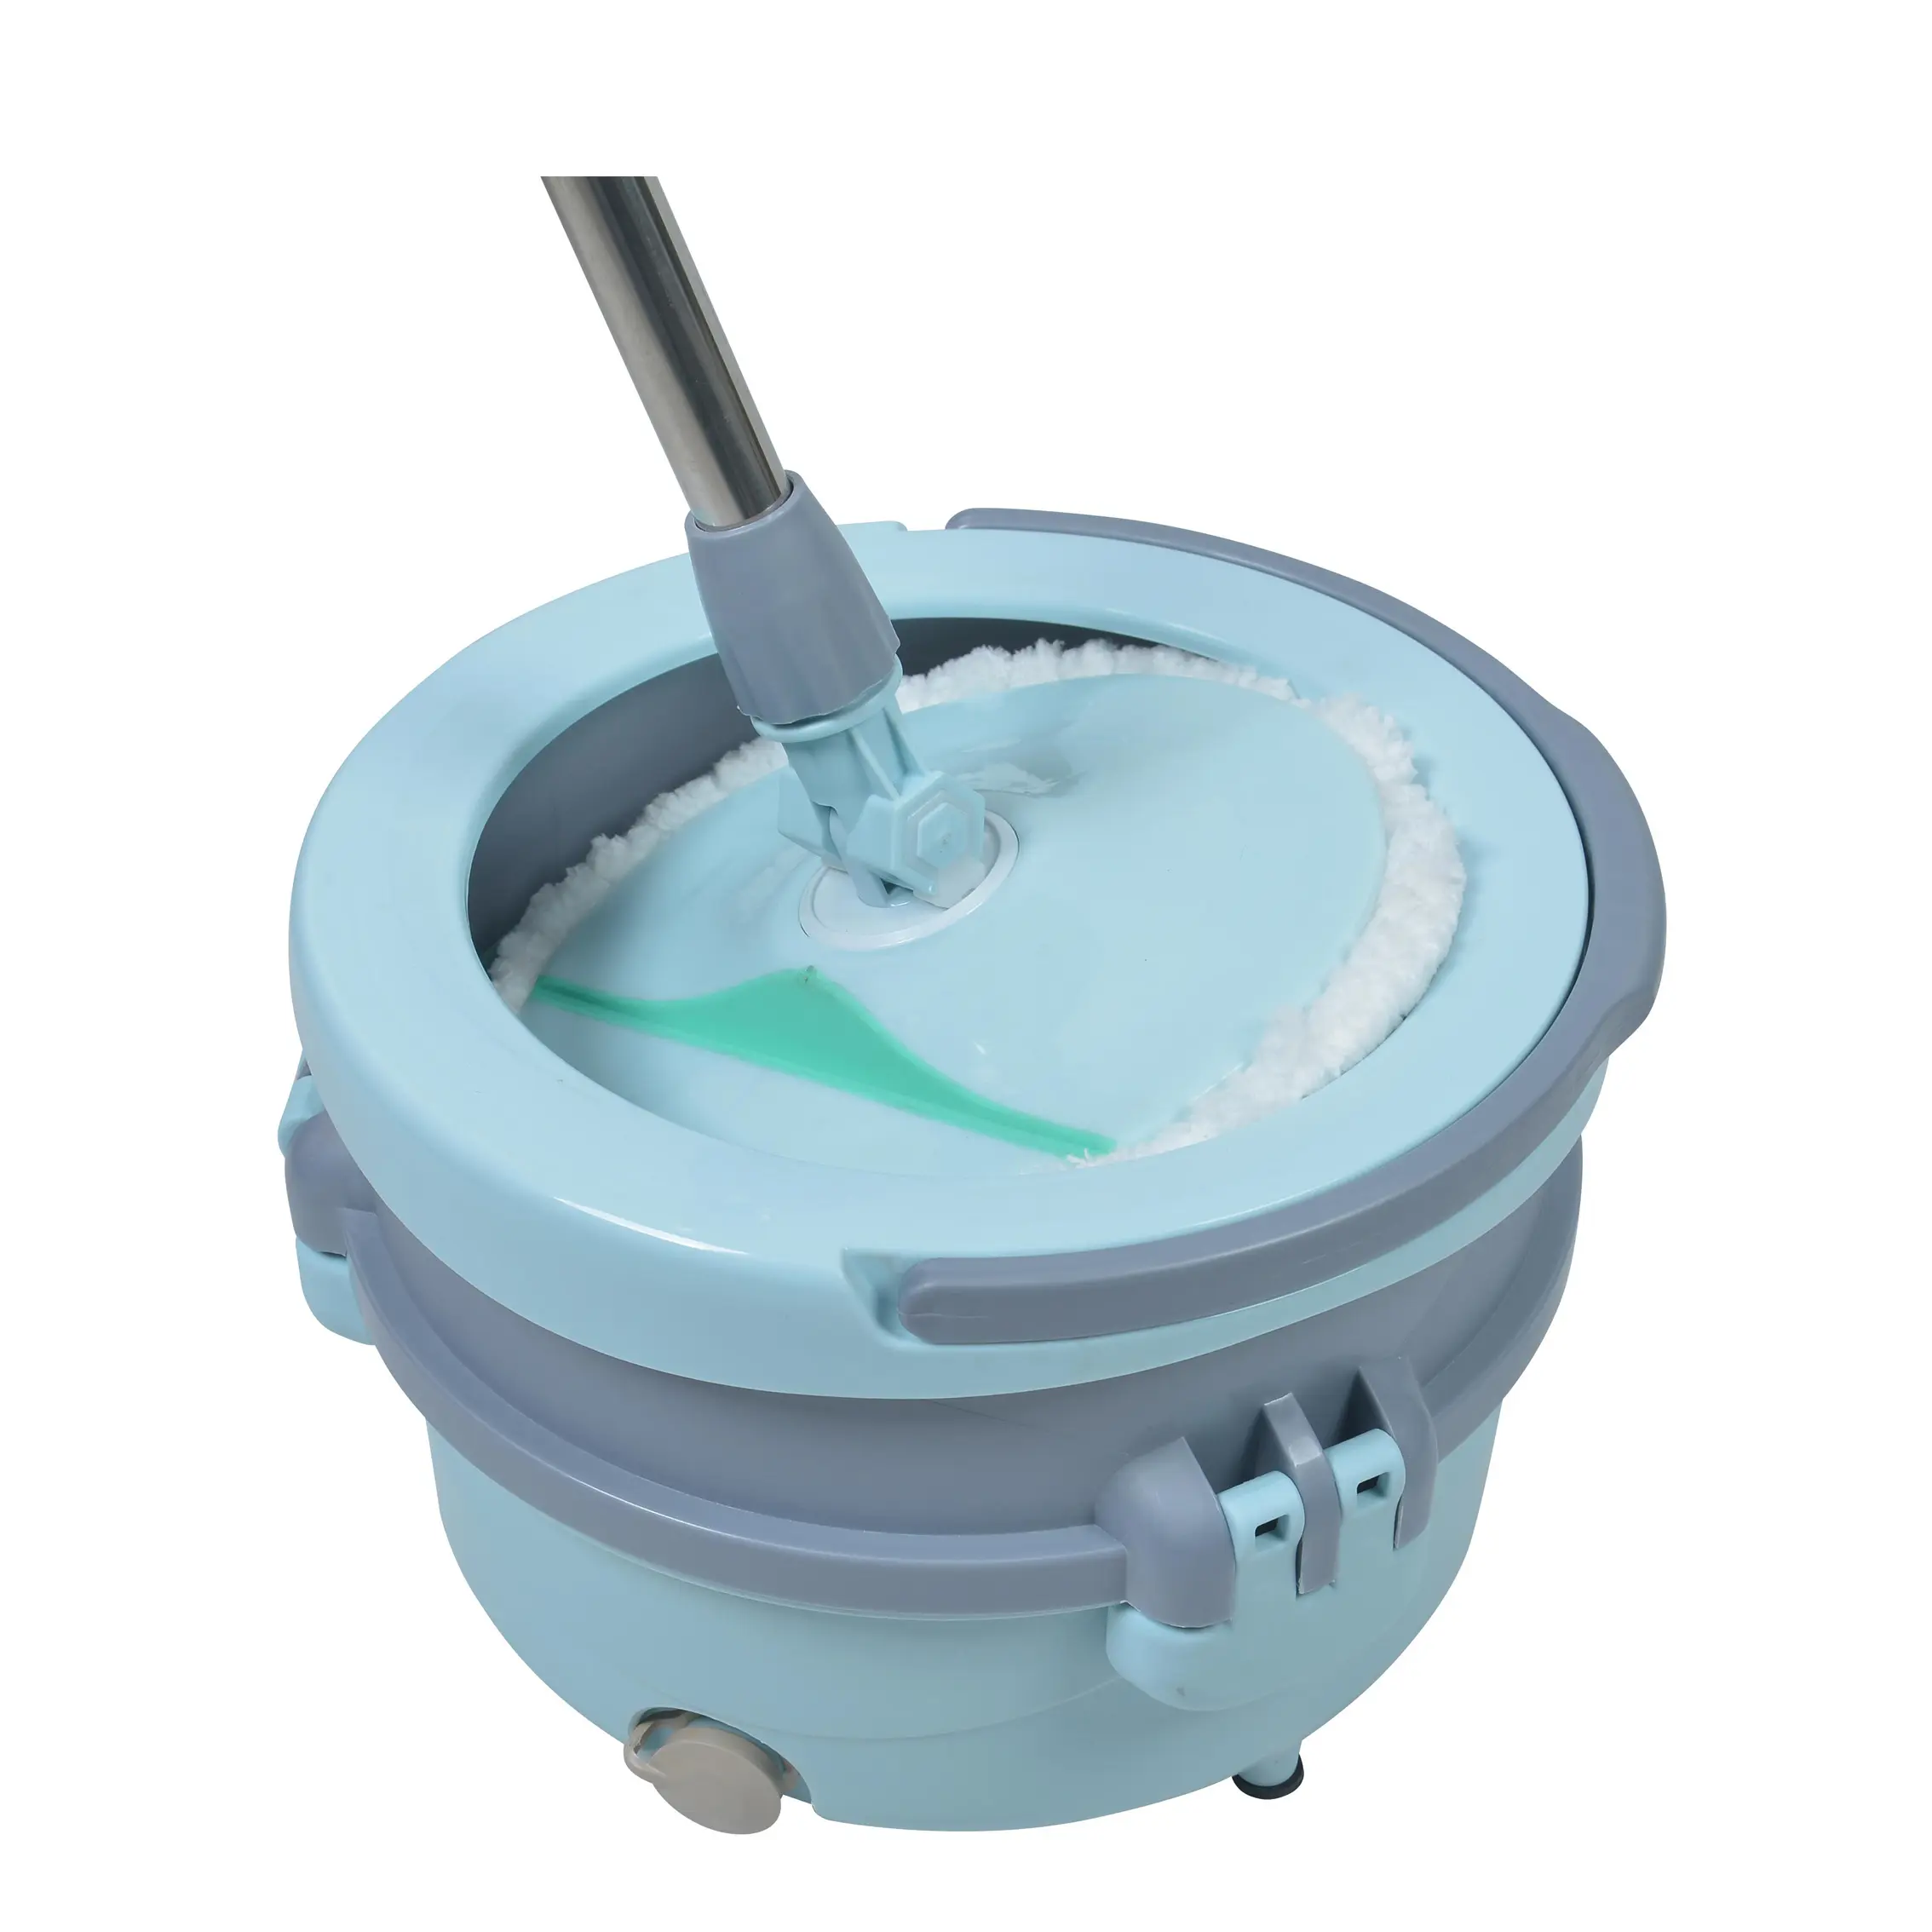 Home Cleaning Spin Magic Mop Bucket Squeezq 360 Microfiber Floor Cleaner Round Easy Handfree Mop